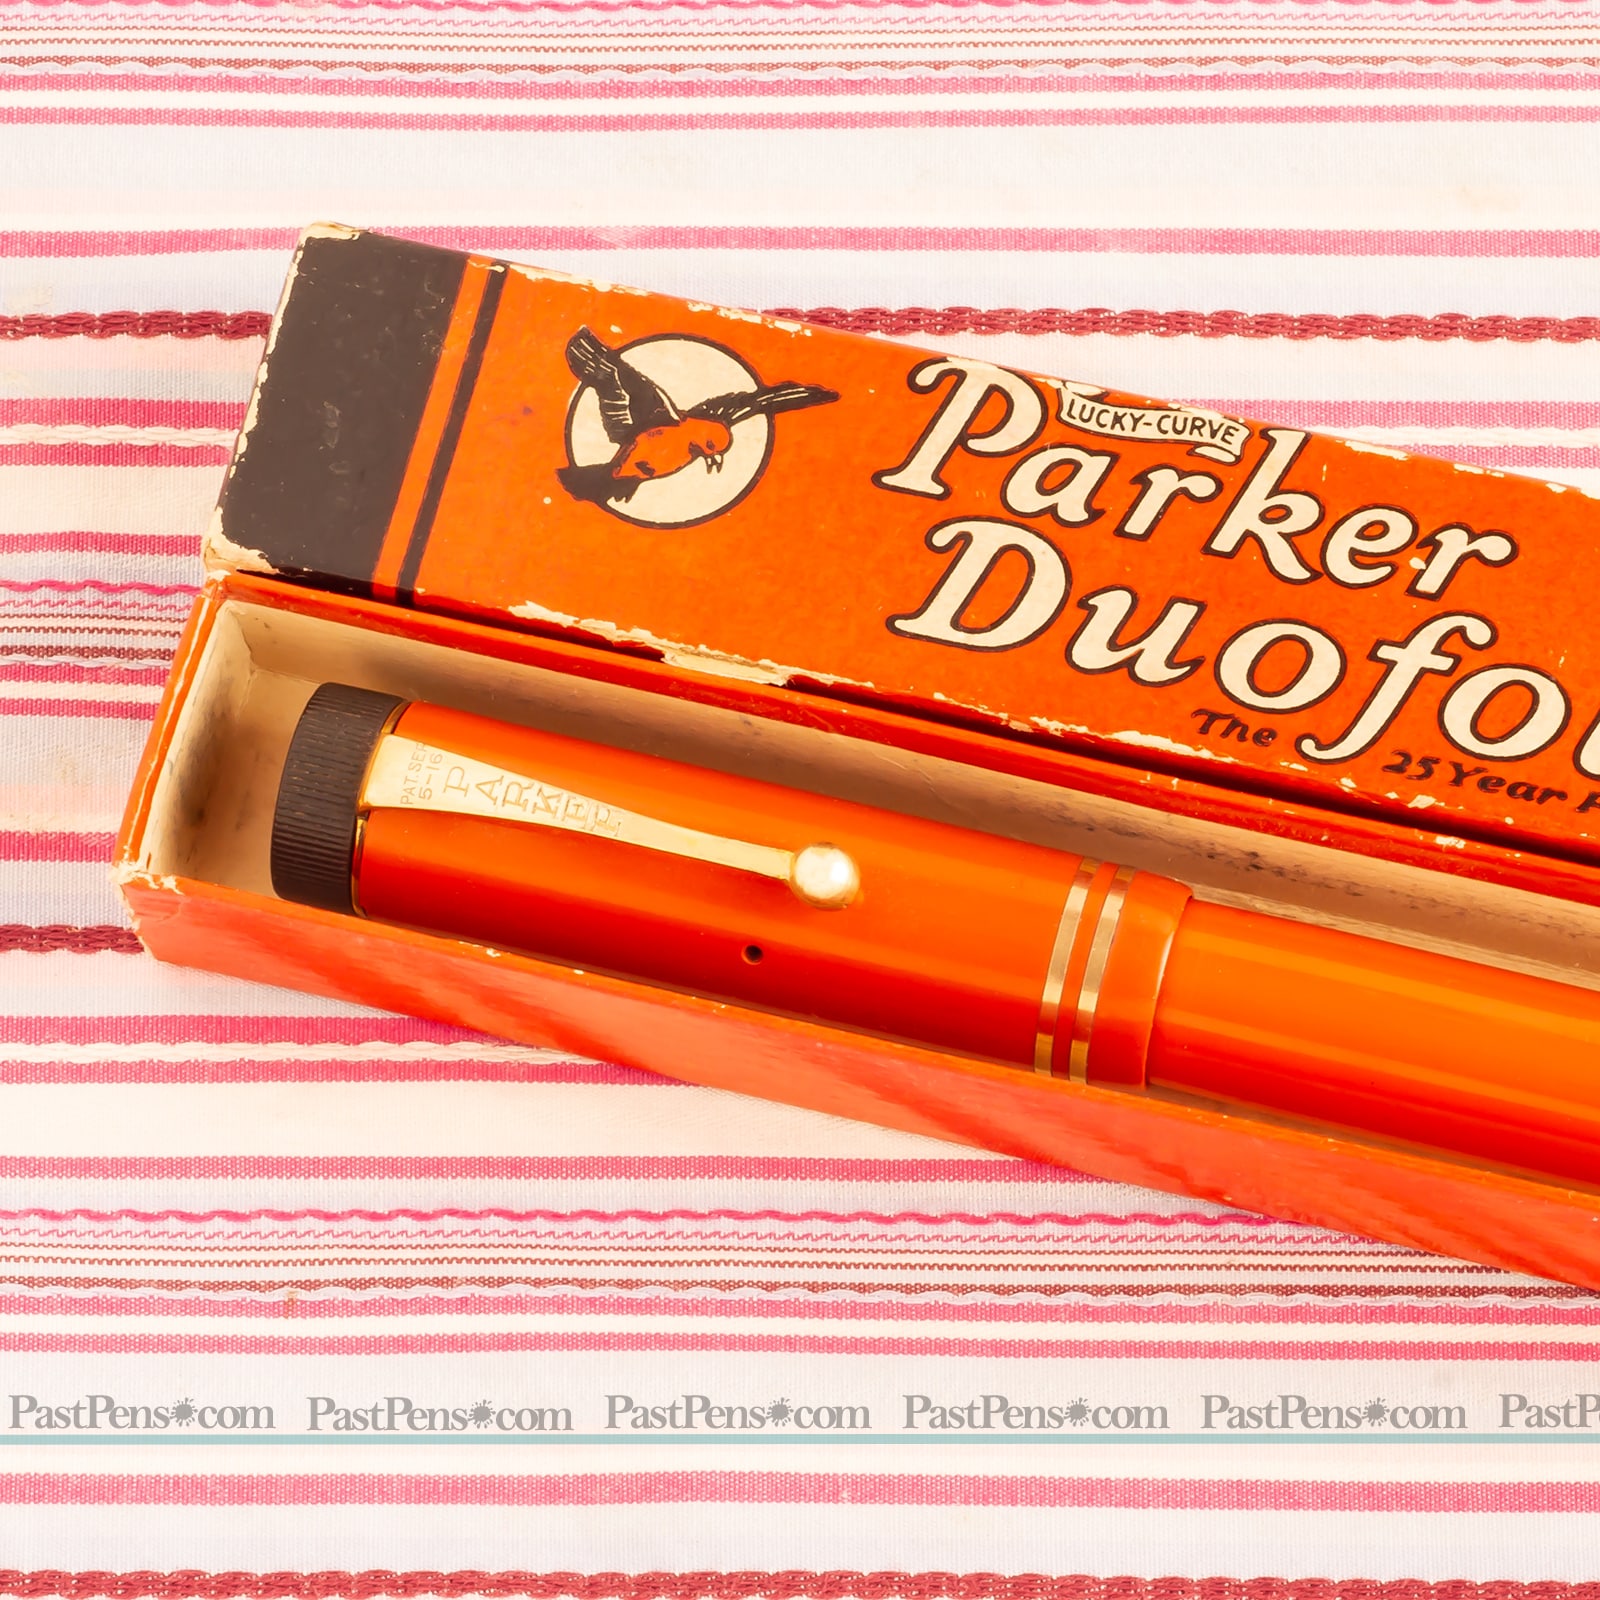 parker duofold senior big red chinese lacquer lucky curve fountain pen vintage pk270